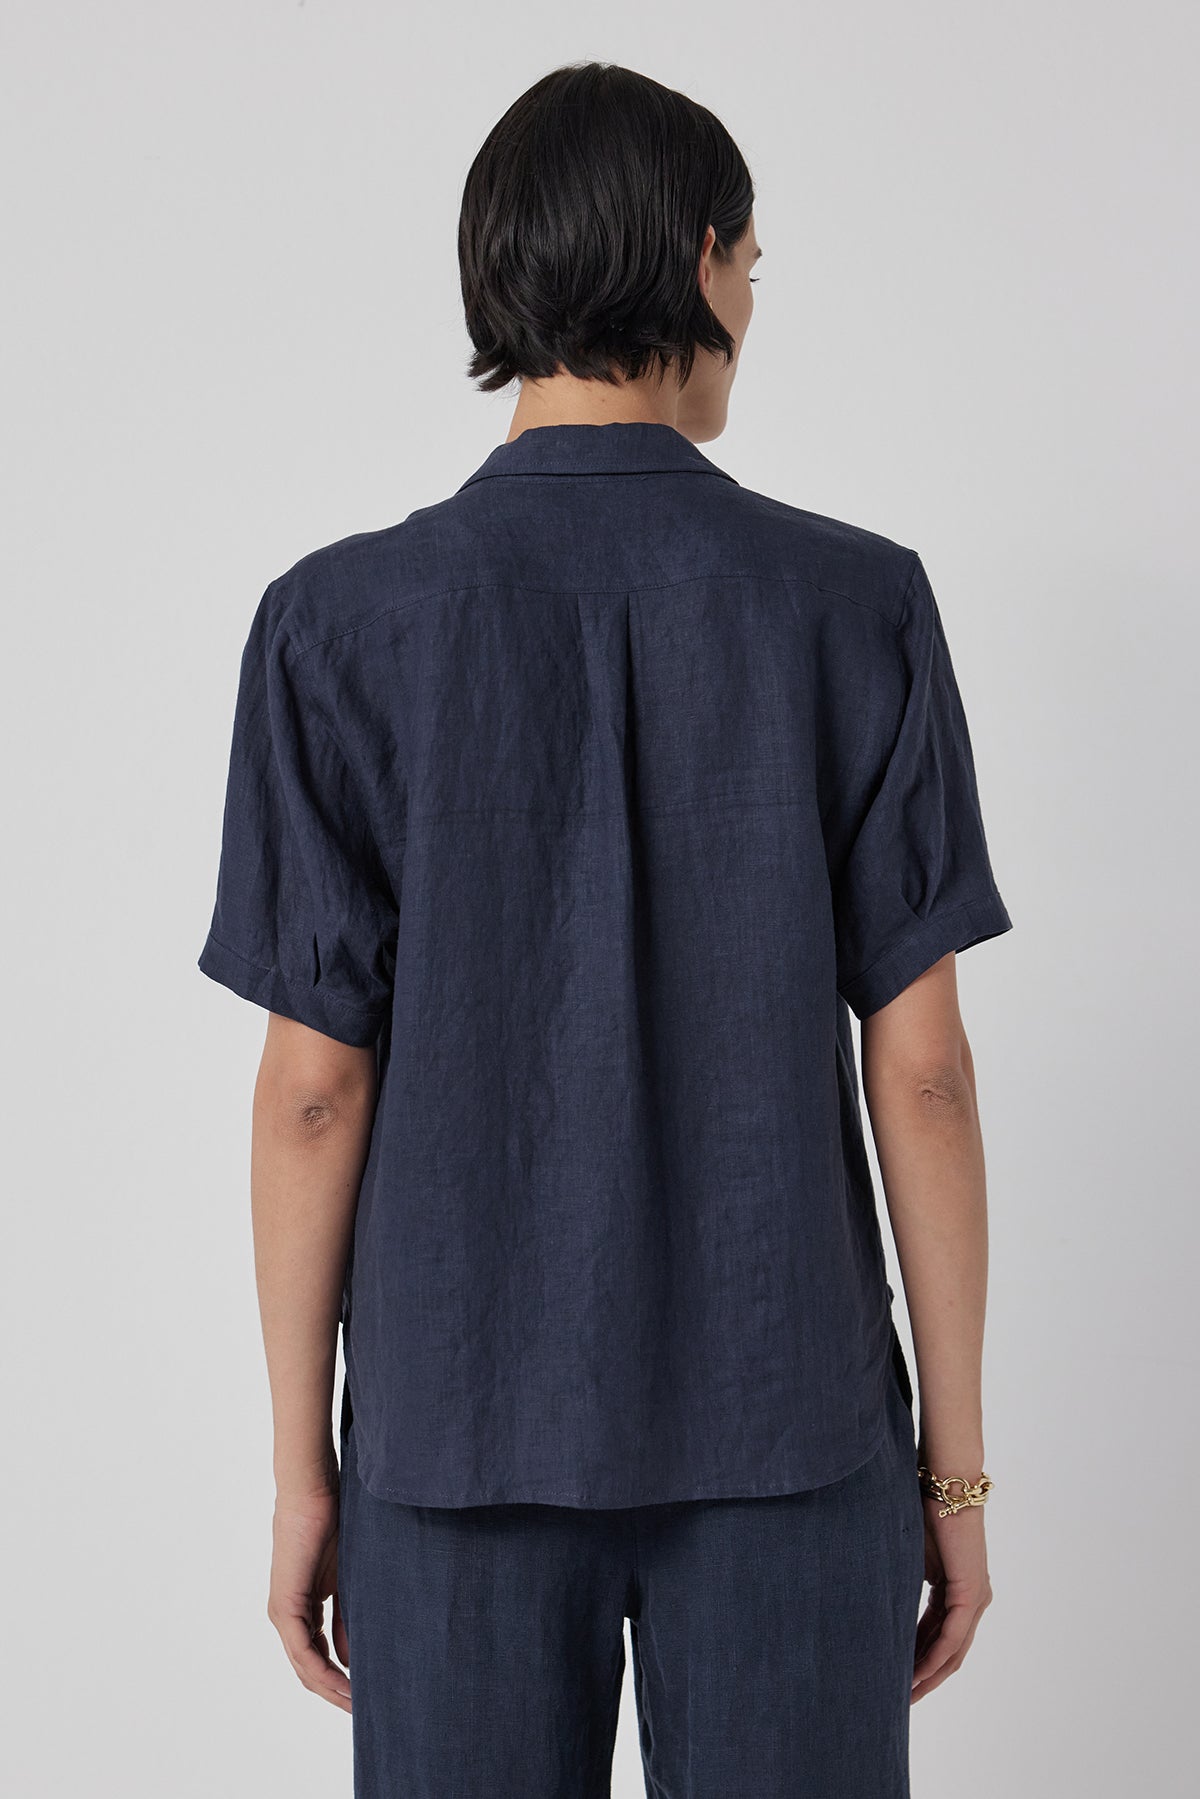 Rear view of a person with shoulder-length black hair, wearing a CLAREMONT LINEN SHIRT by Velvet by Jenny Graham and matching pants, standing against a light gray background.-36409572720833